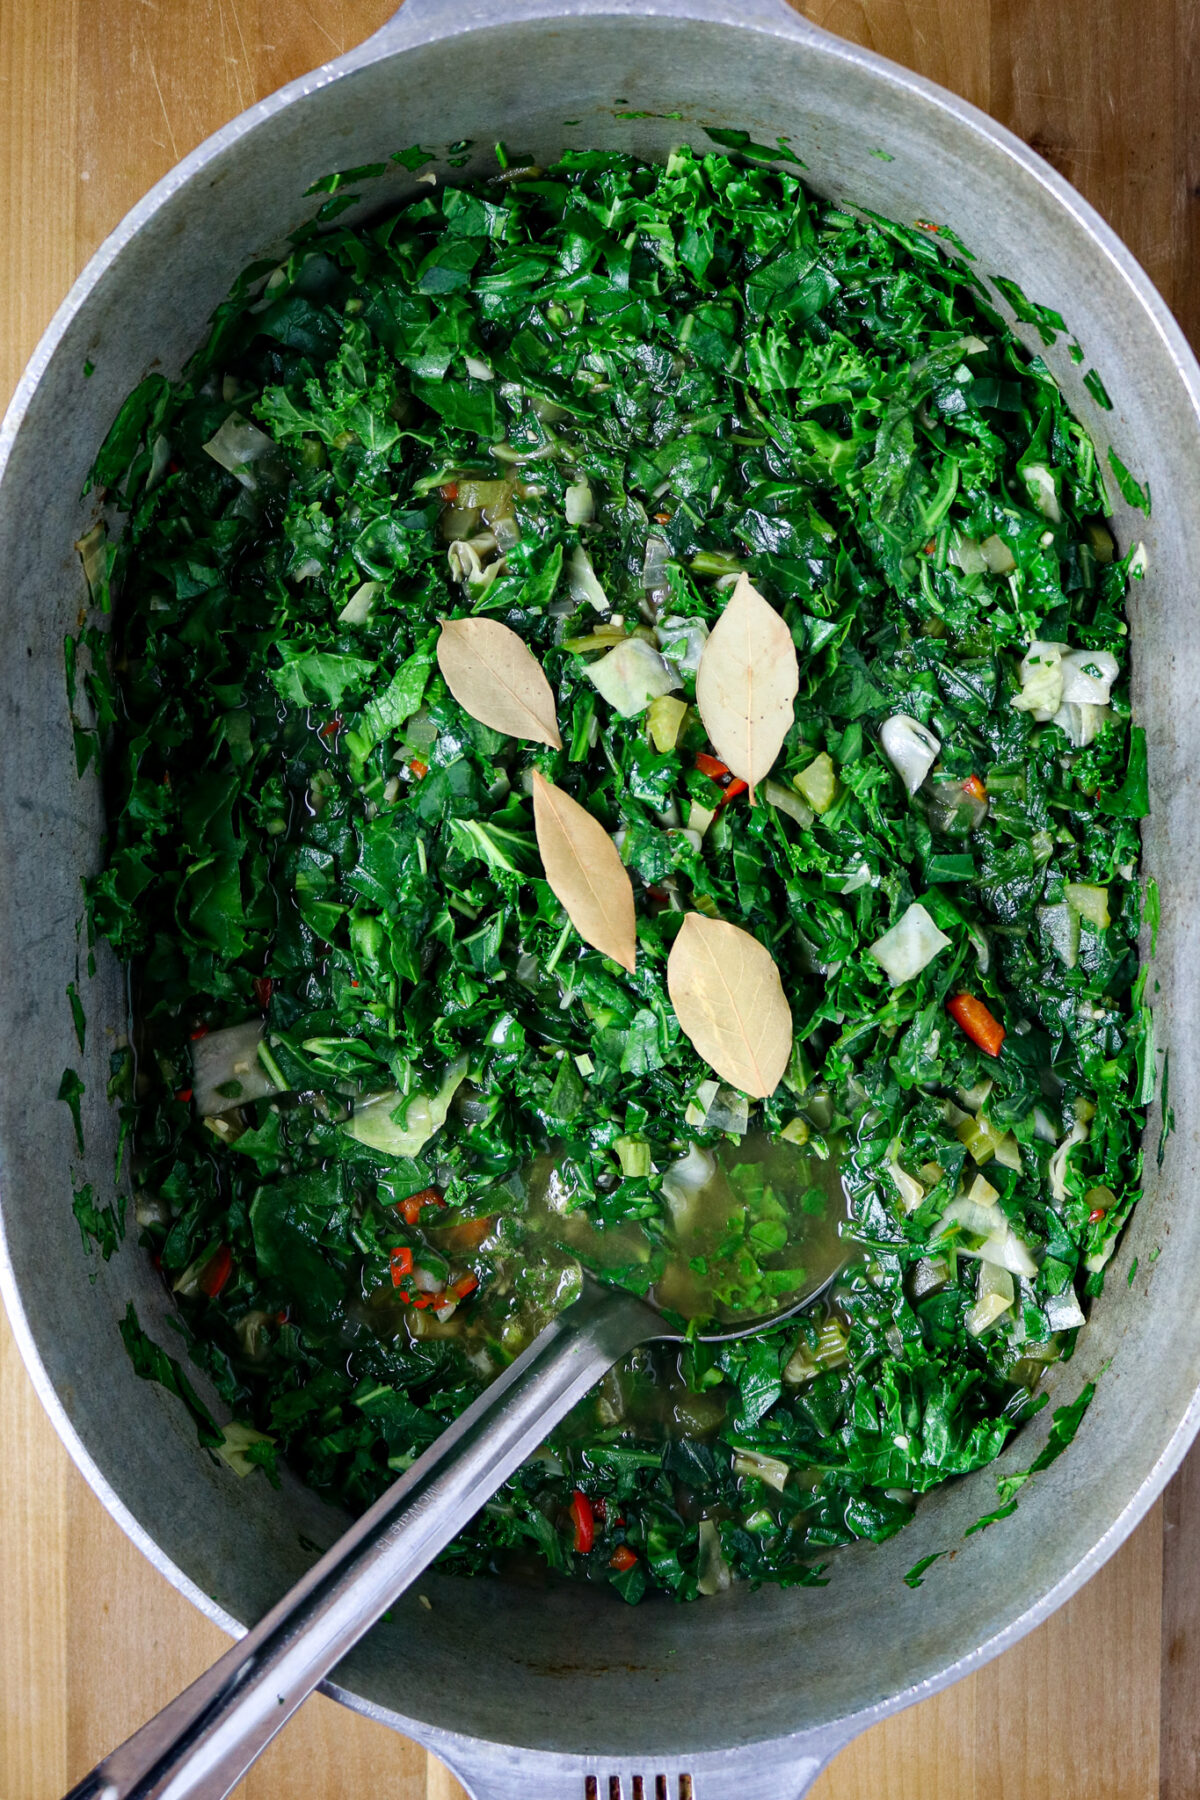 A large pot of greens for gumbo zherbes' with four bayleaves laying on top.